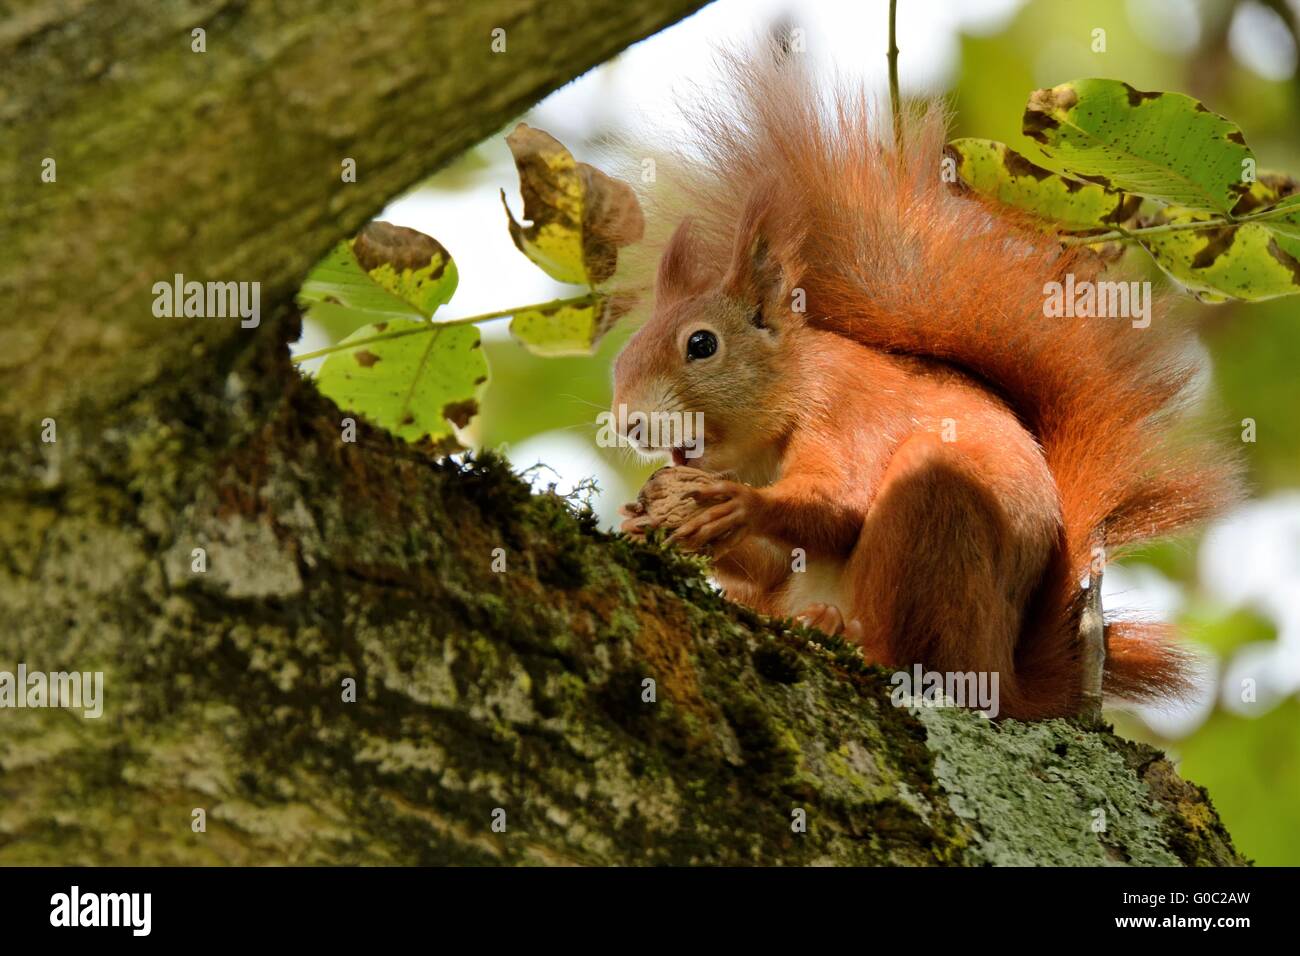 Red Squirrel eating Nut Stock Photo